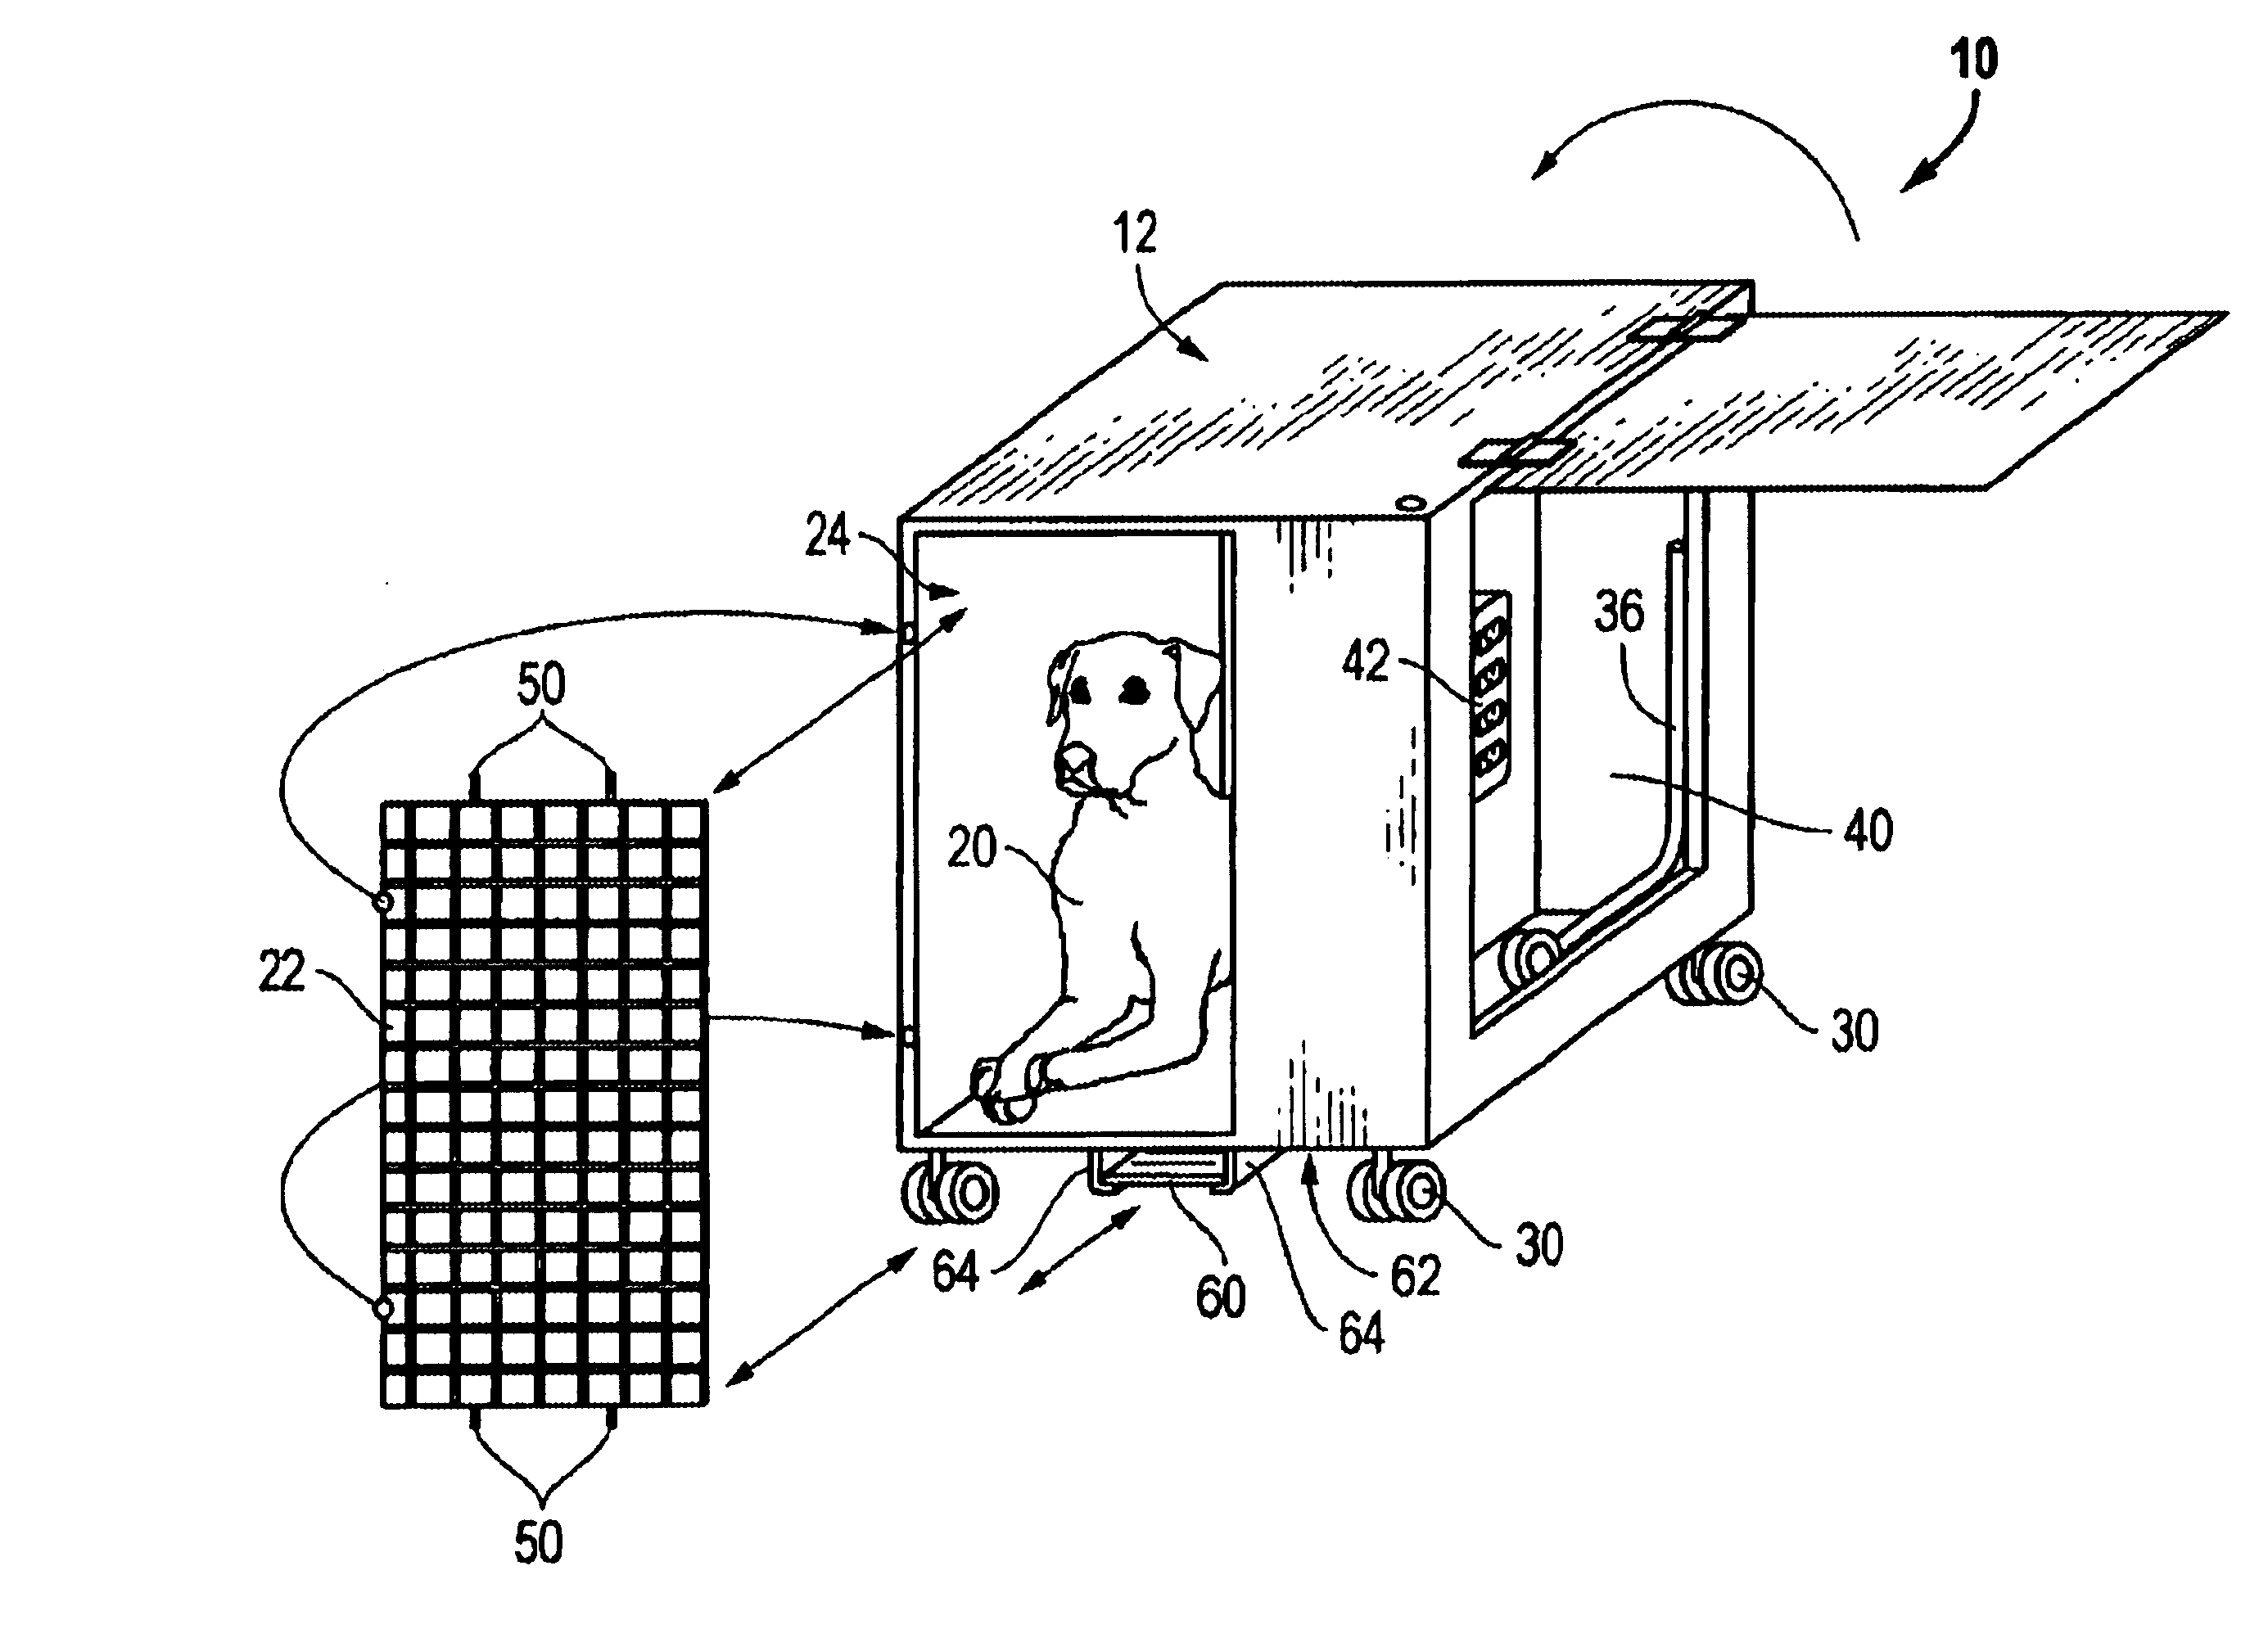 Integrated animal crate and grooming table